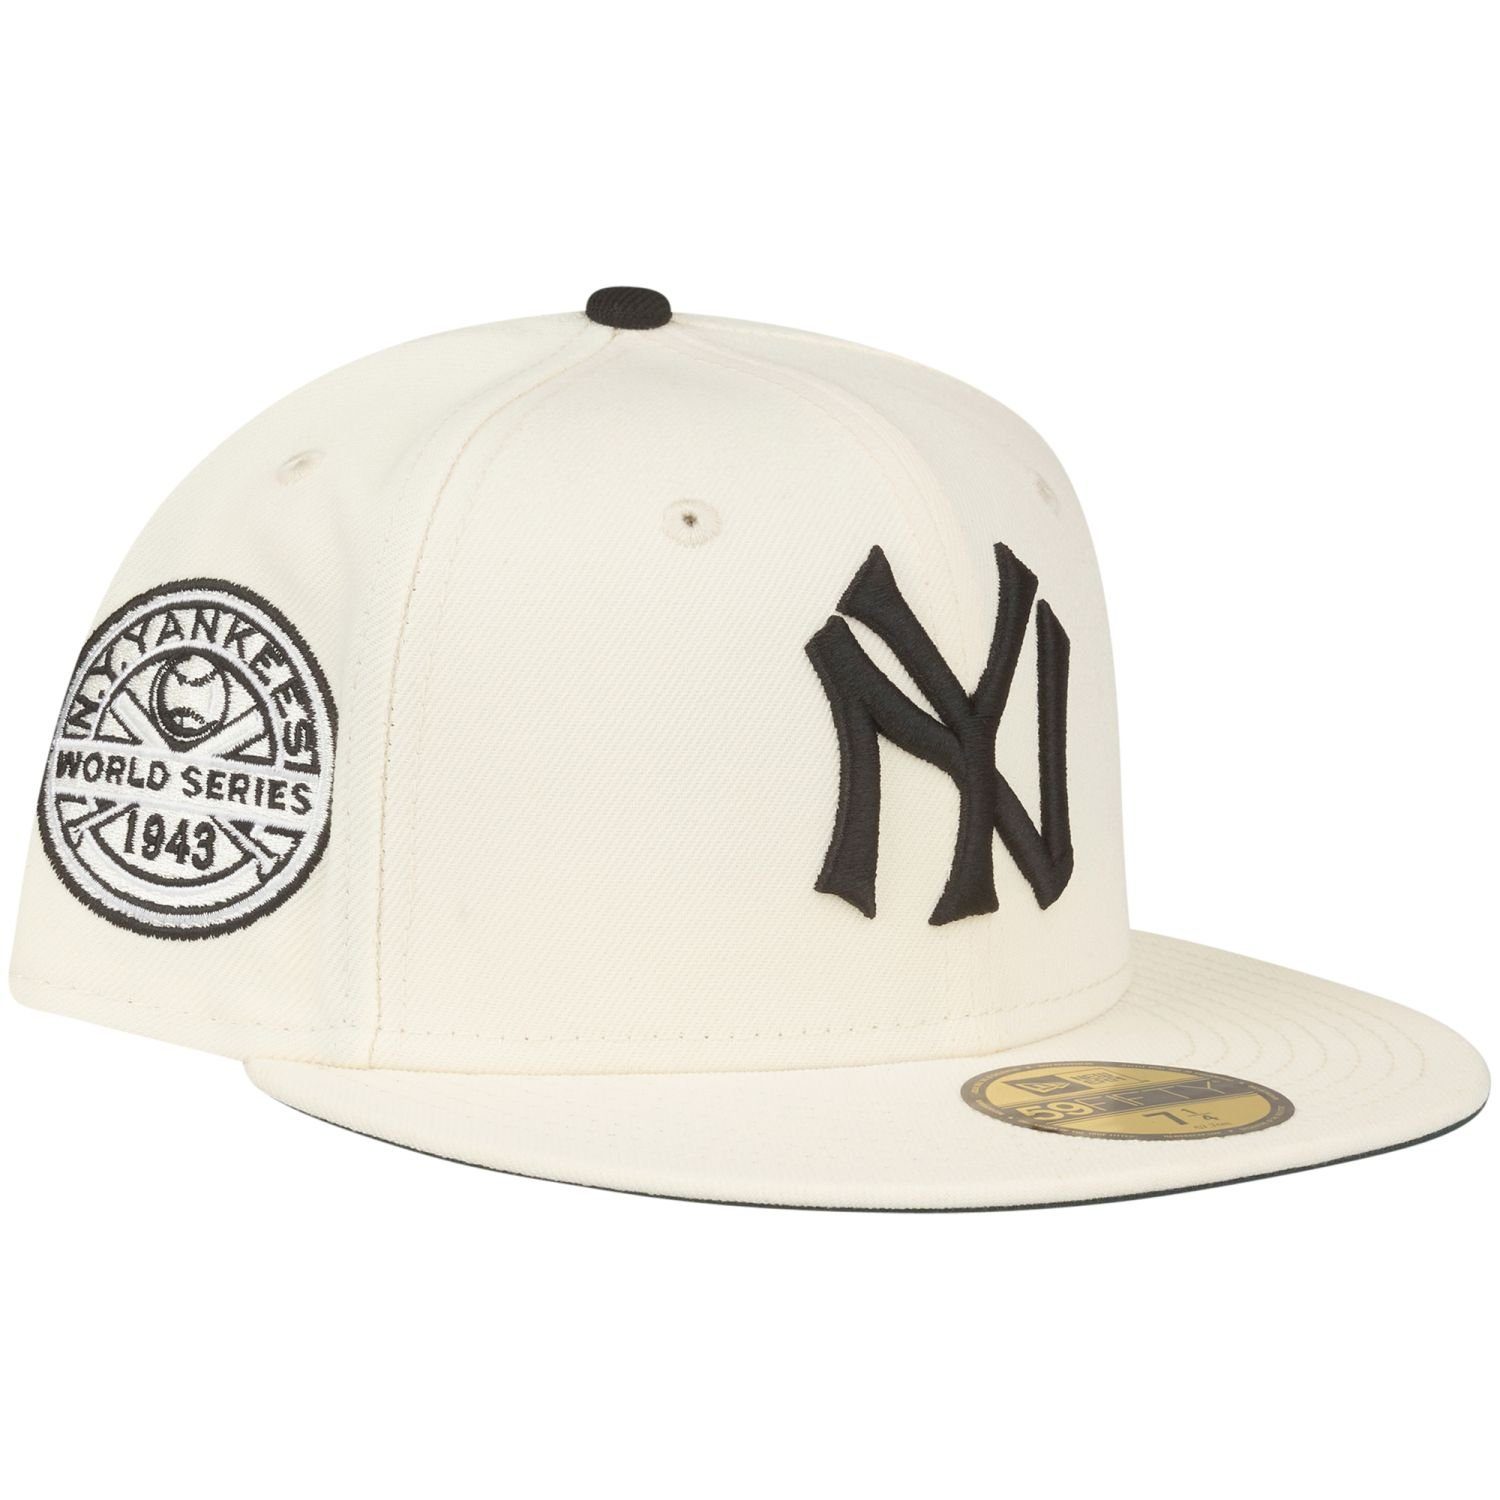 Yankees New New COOPERSTOWN Era Fitted Cap York 59Fifty